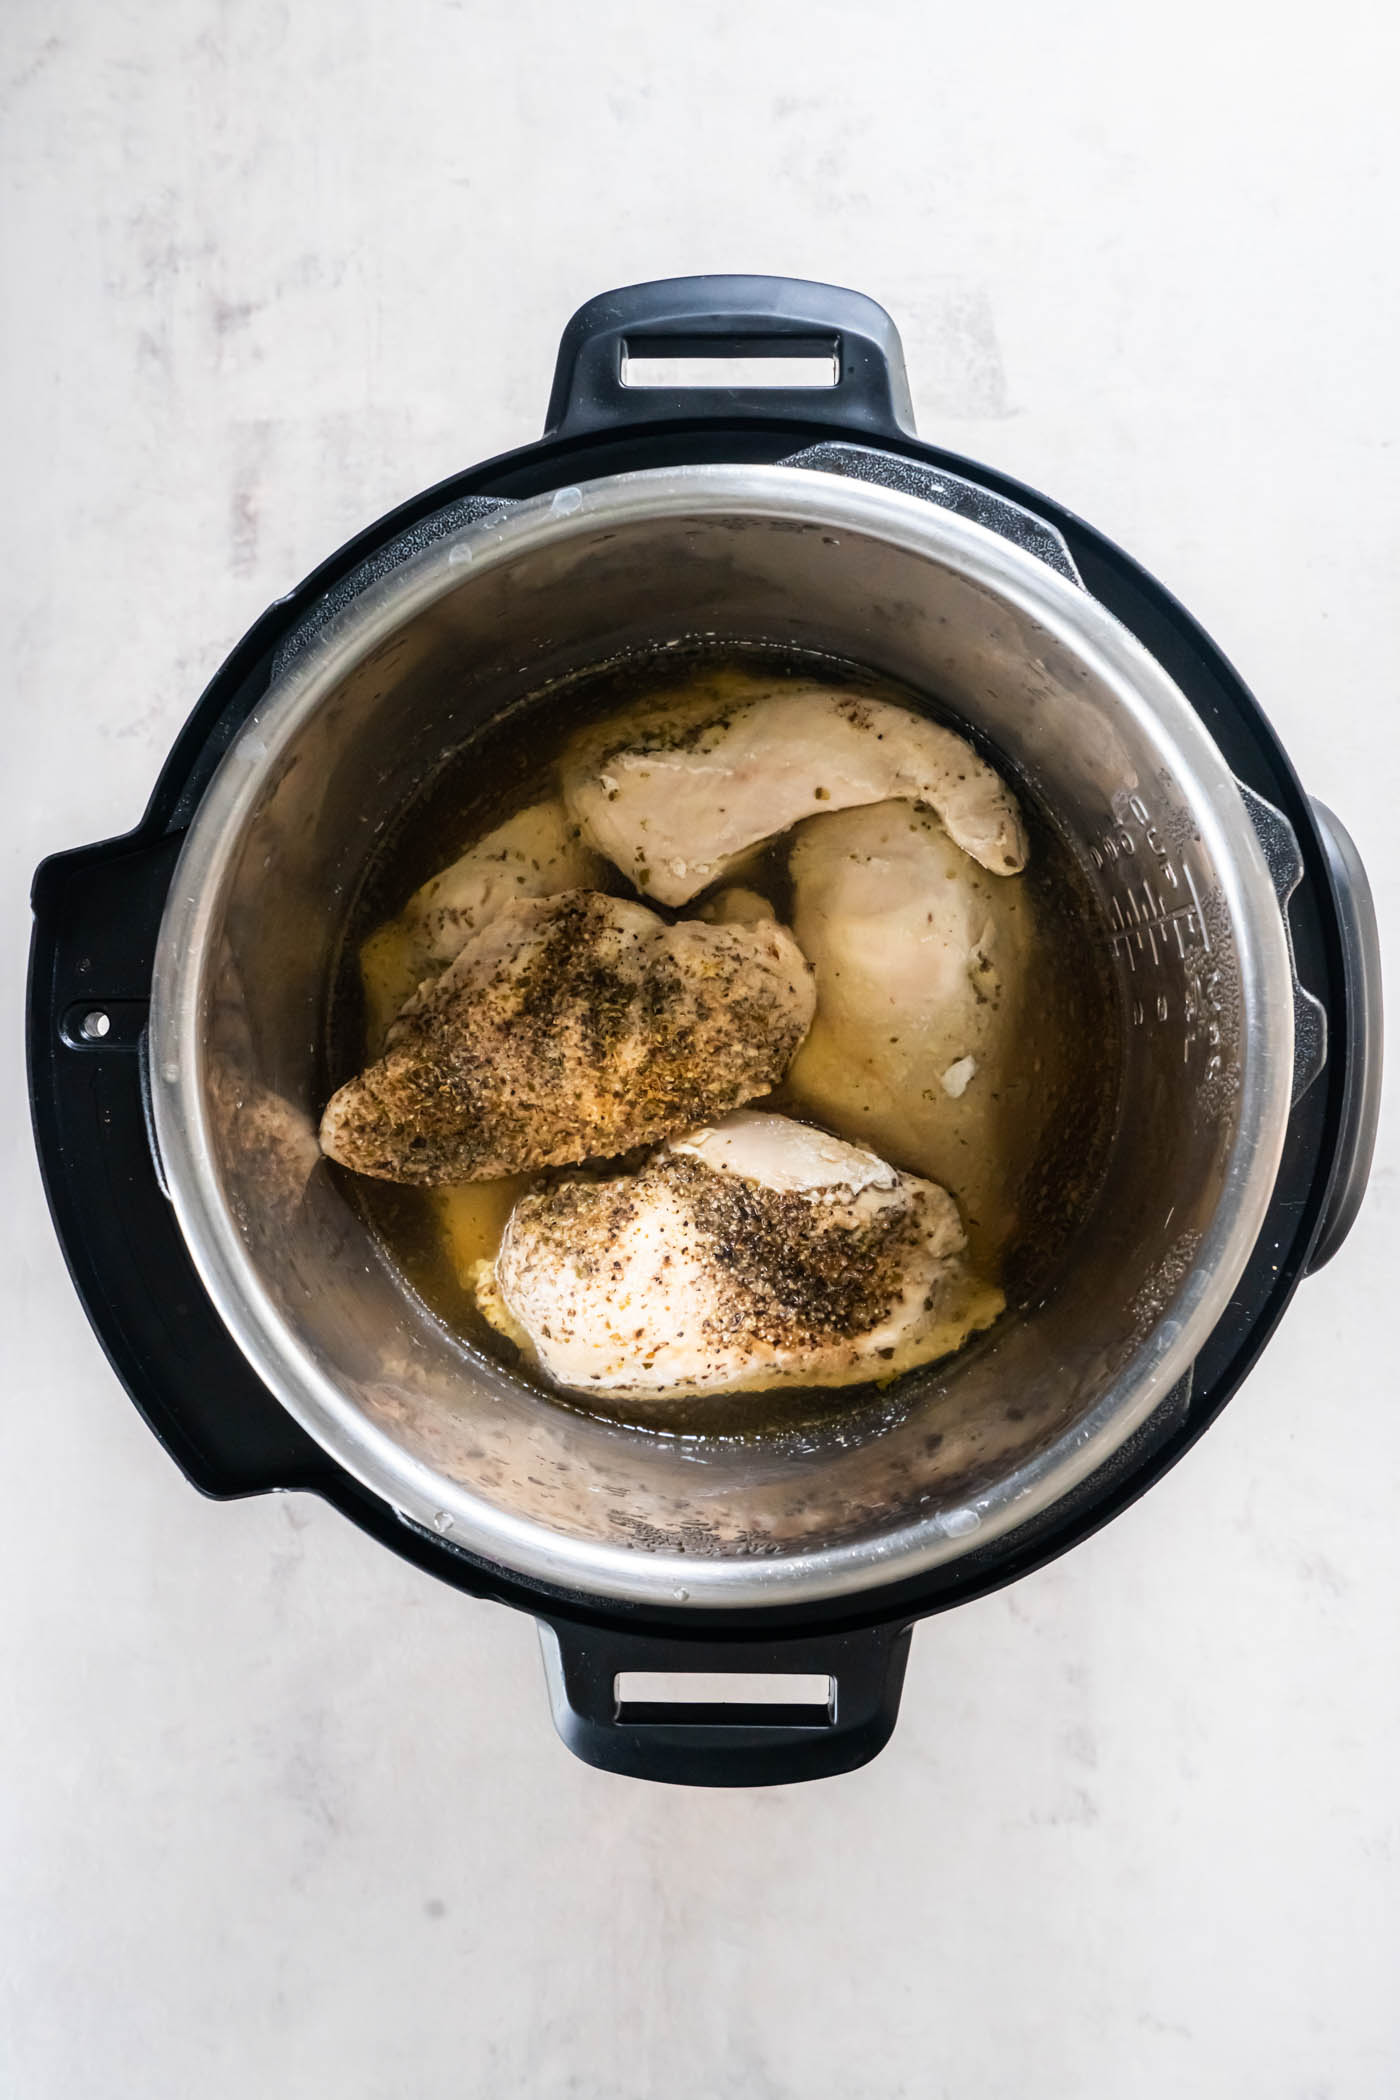 Cooked chicken breasts with broth and seasonings in Instant Pot.